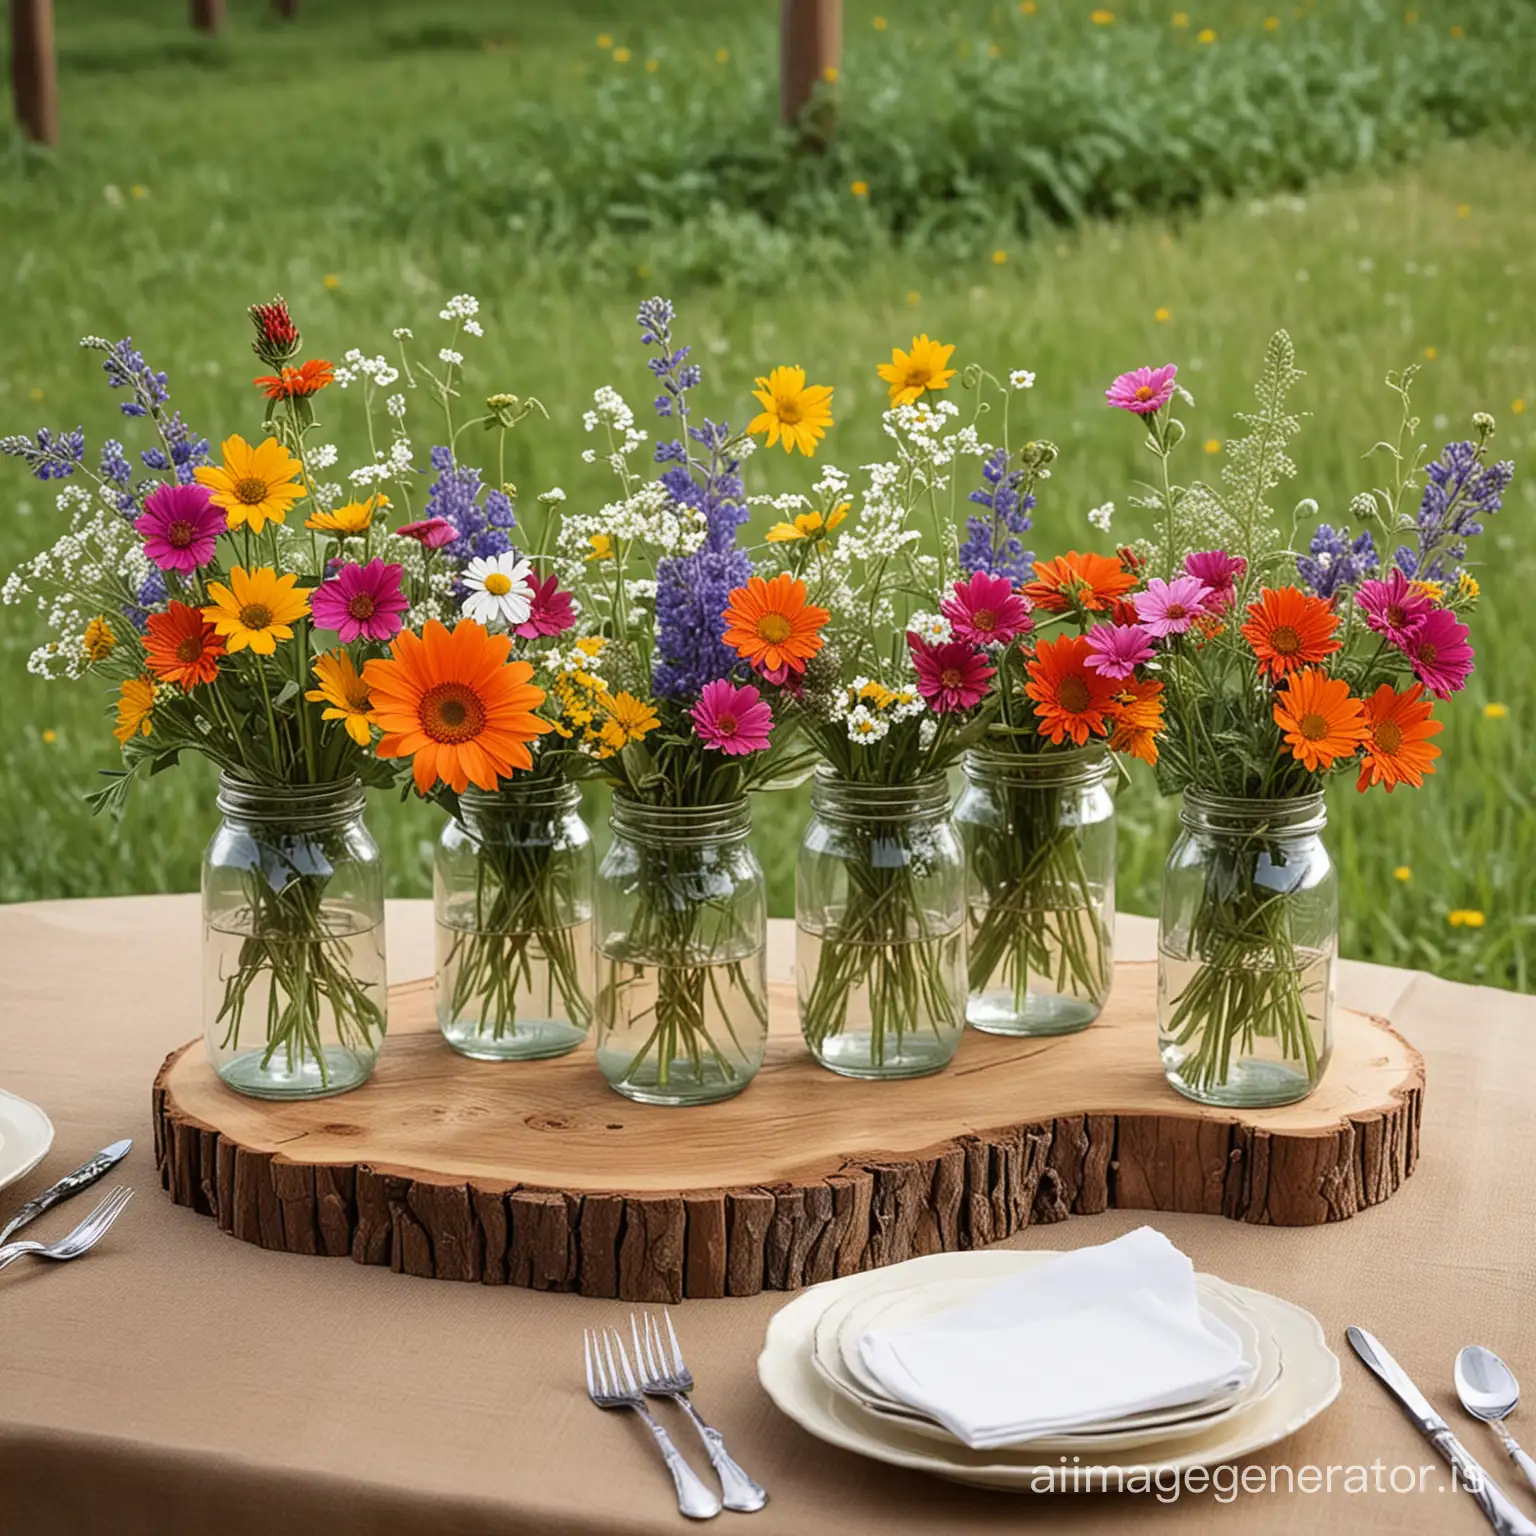 Create an image of a rustic centerpiece featuring natural wood slices as bases, each topped with a jar or vase filled with vibrant wildflowers. The wood should have a raw, earthy texture, enhancing the rustic charm of the setting. The jars or vases should be simple and clear, allowing the colorful wildflowers to stand out. This arrangement should evoke a feeling of a casual, countryside charm, perfect for a rustic-themed event. The background should be muted to emphasize the natural beauty and simplicity of the centerpiece.